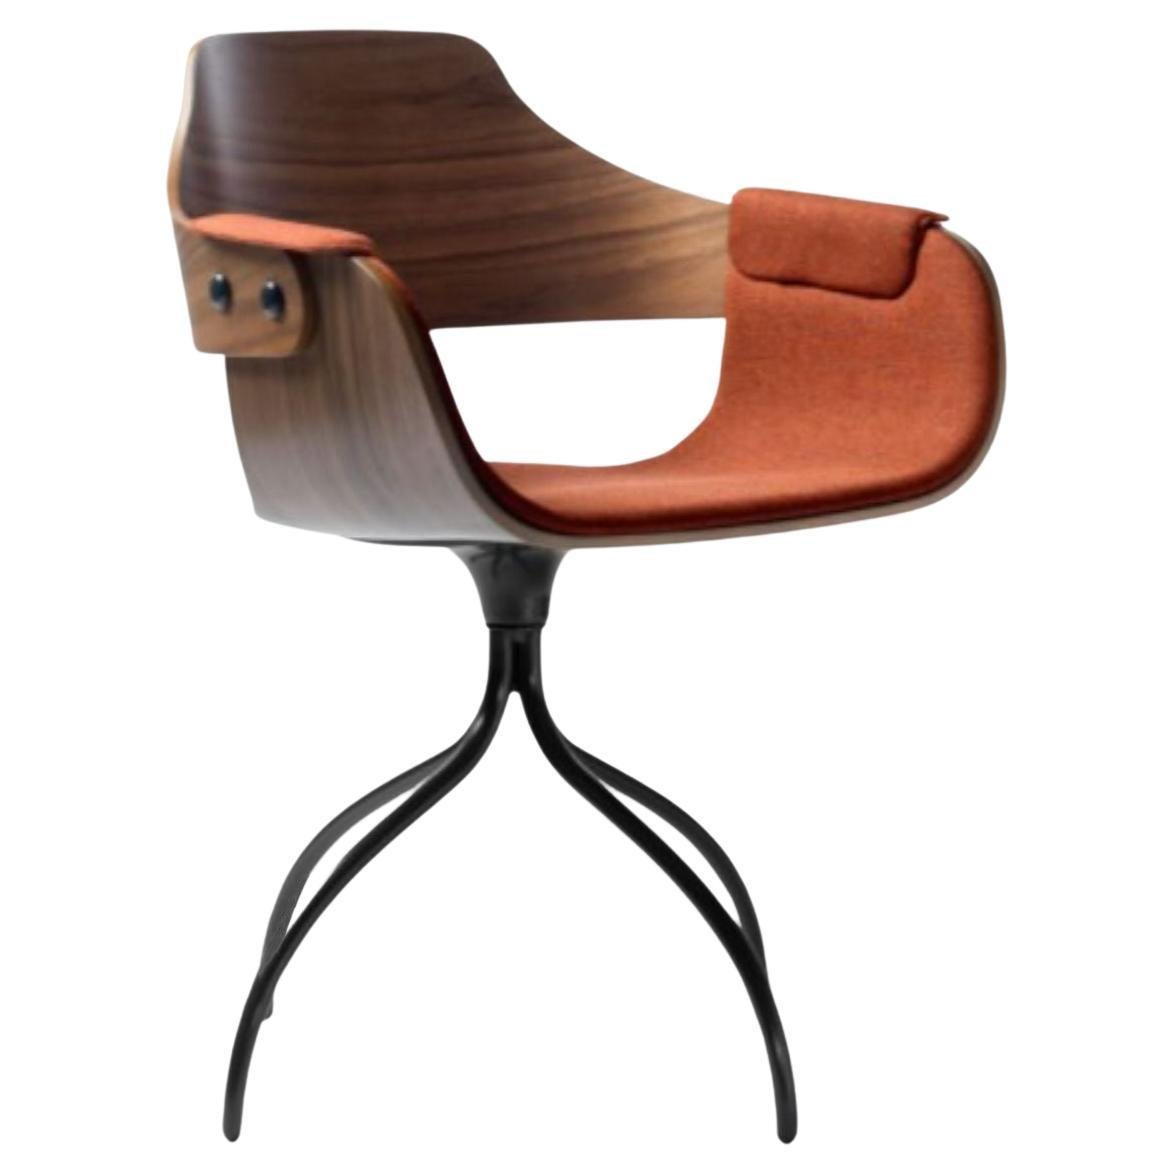 Swivel Base Showtime Orange Chair by Jaime Hayon For Sale